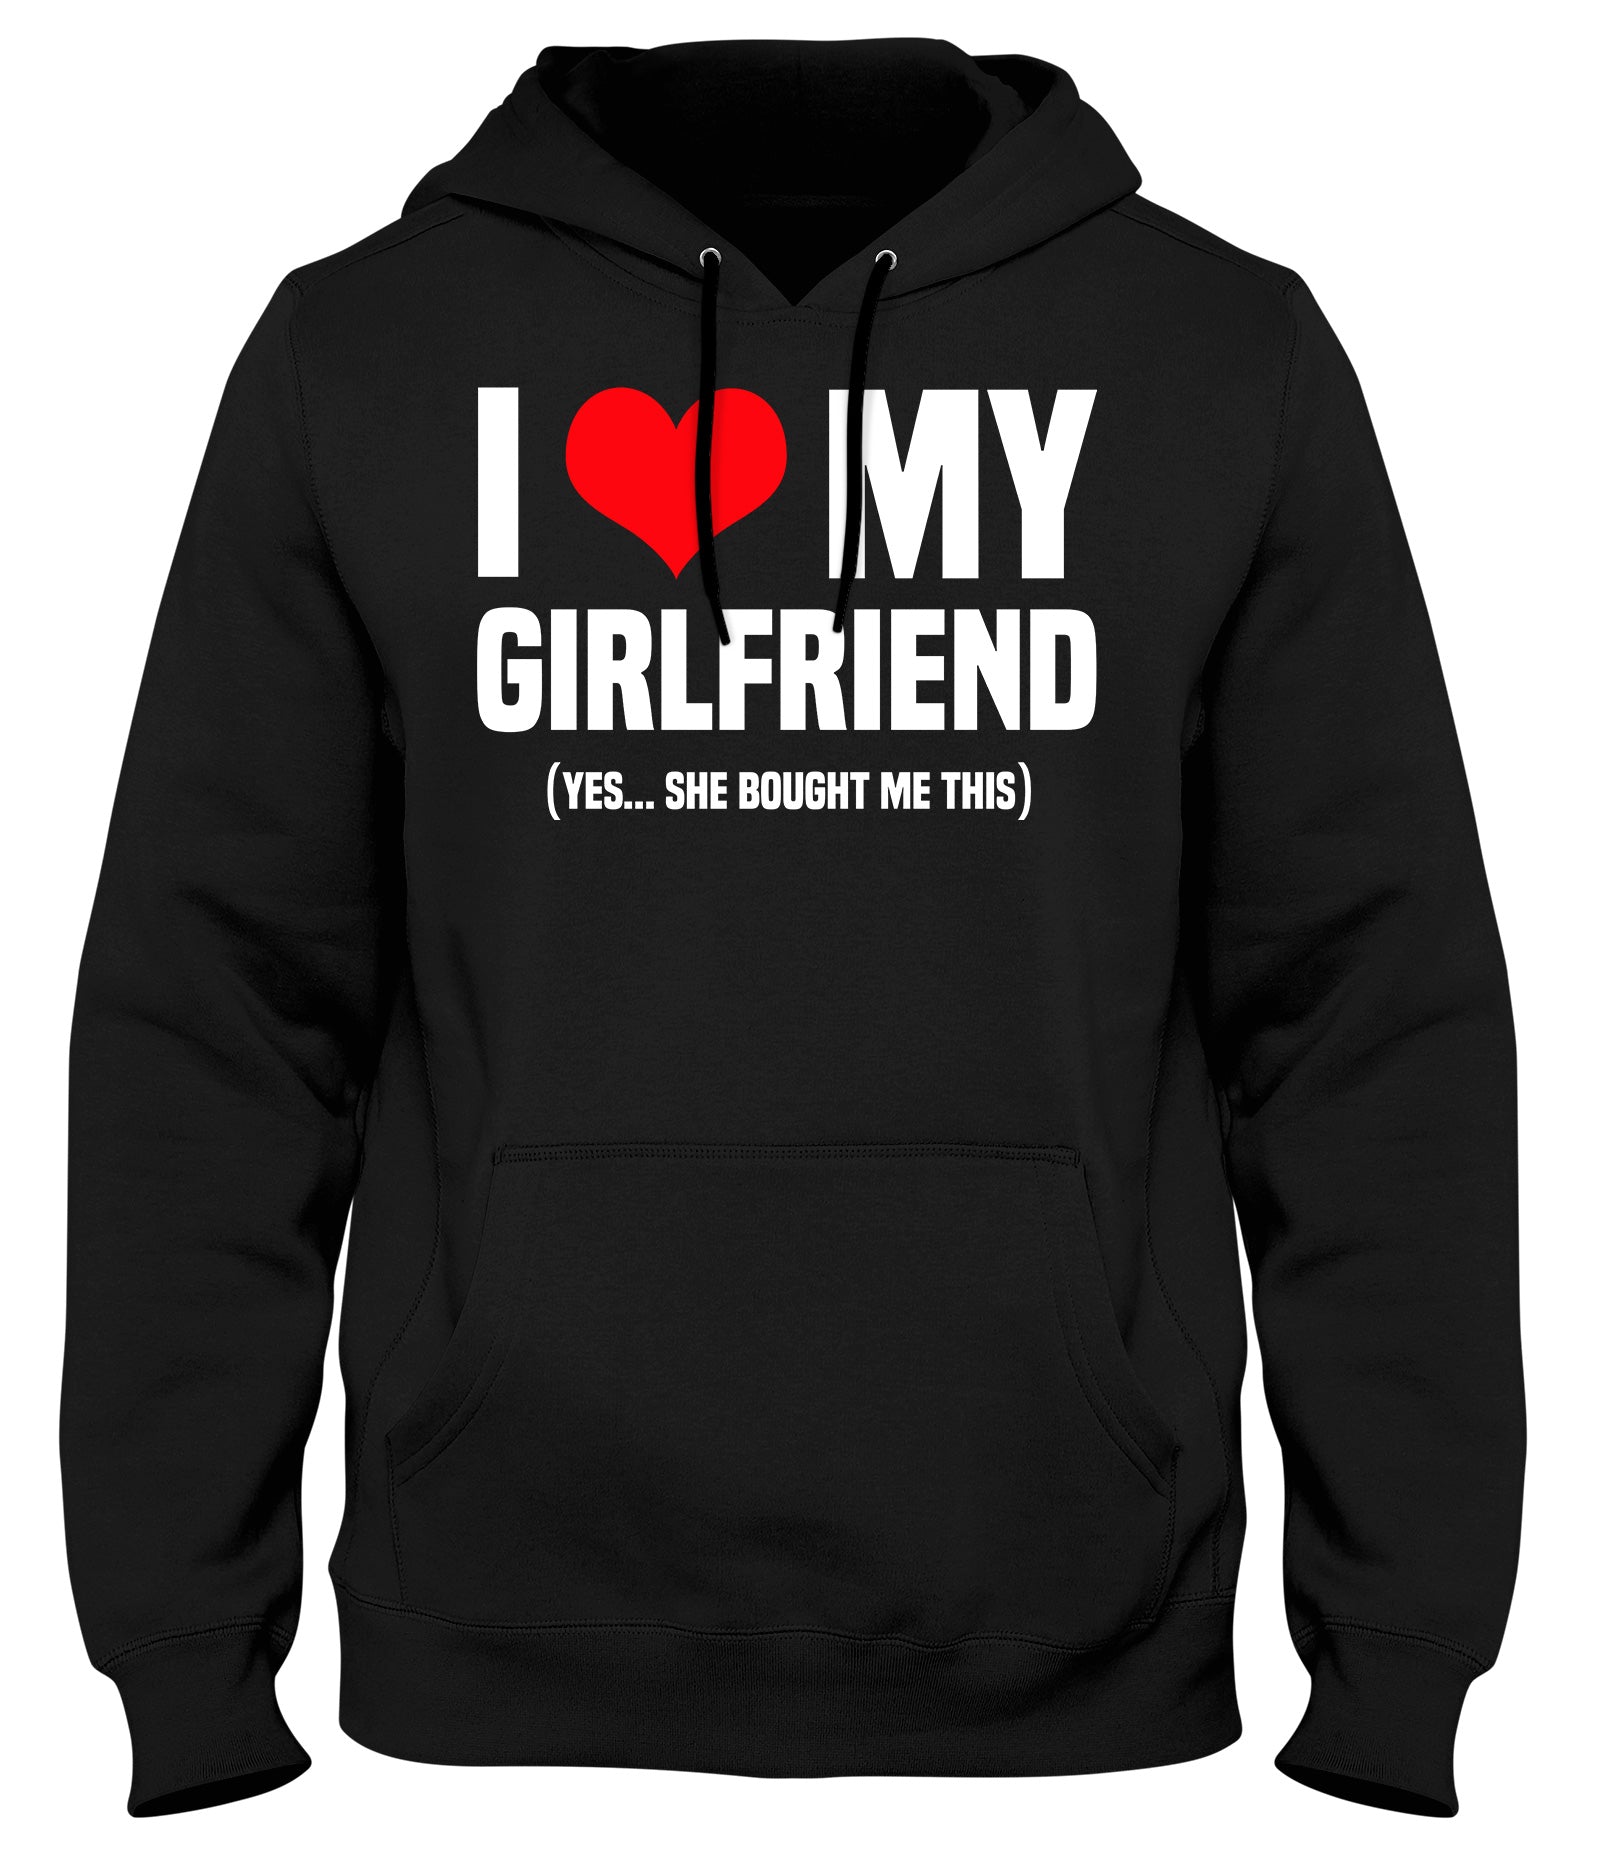 I LOVE MY GIRLFRIEND  (YES SHE BOUGHT ME THIS)  MENS WOMENS LADIES UNISEX FUNNY SLOGAN HOODIE